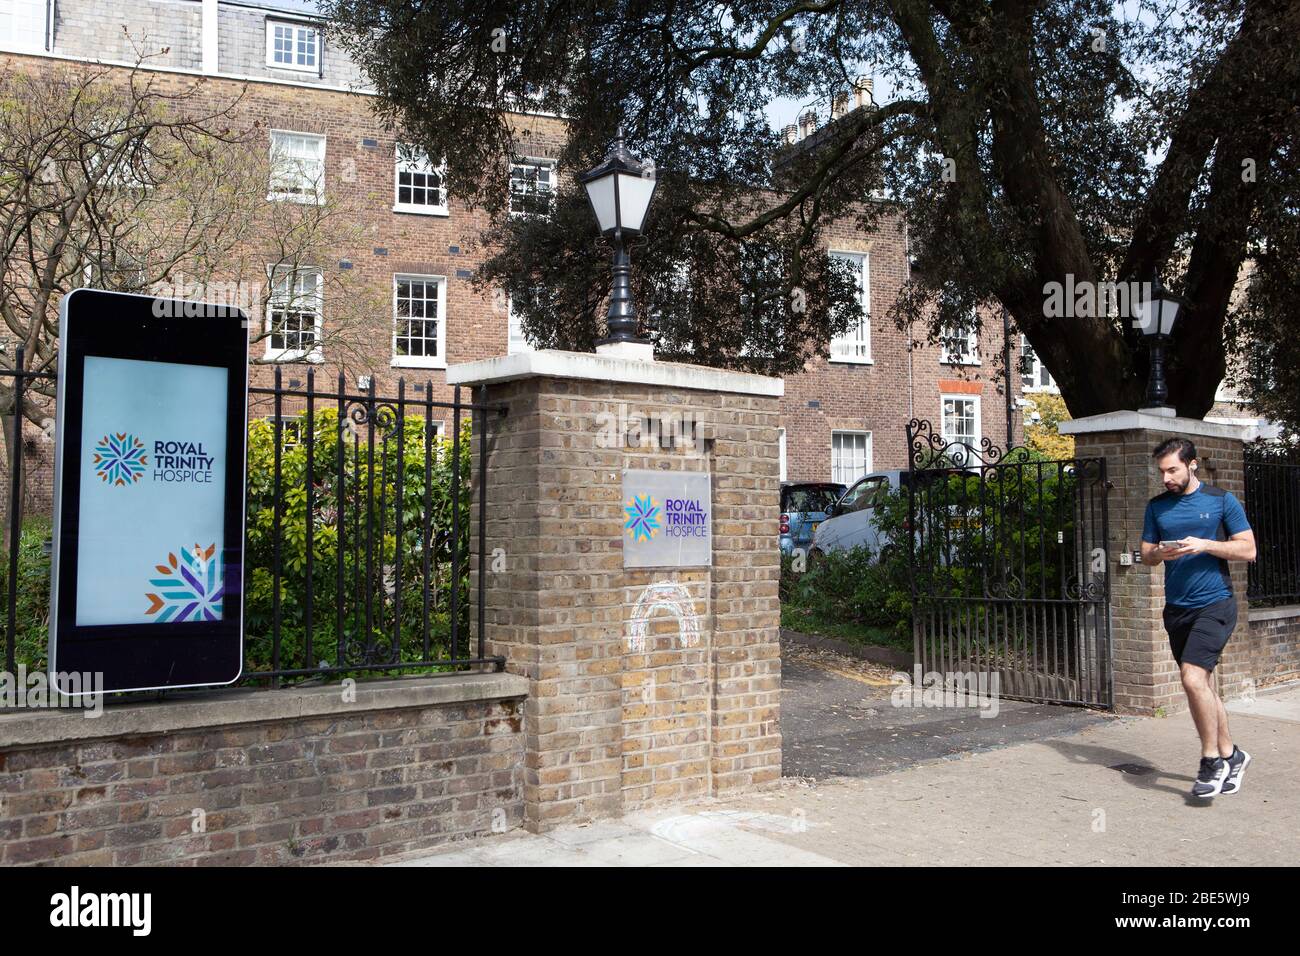 London, UK, 12 April 2020: Royal Trinity Hospice in Clapham, south London, has signs displaying corona virus information and appeals for financial support. With all their chairty shops closed and other revenue streams such as open gardens and sponsored walks not allowed, charities face severe short-falls in their fundraising because of the coronavirus. Anna Watson/Alamy Live News Stock Photo